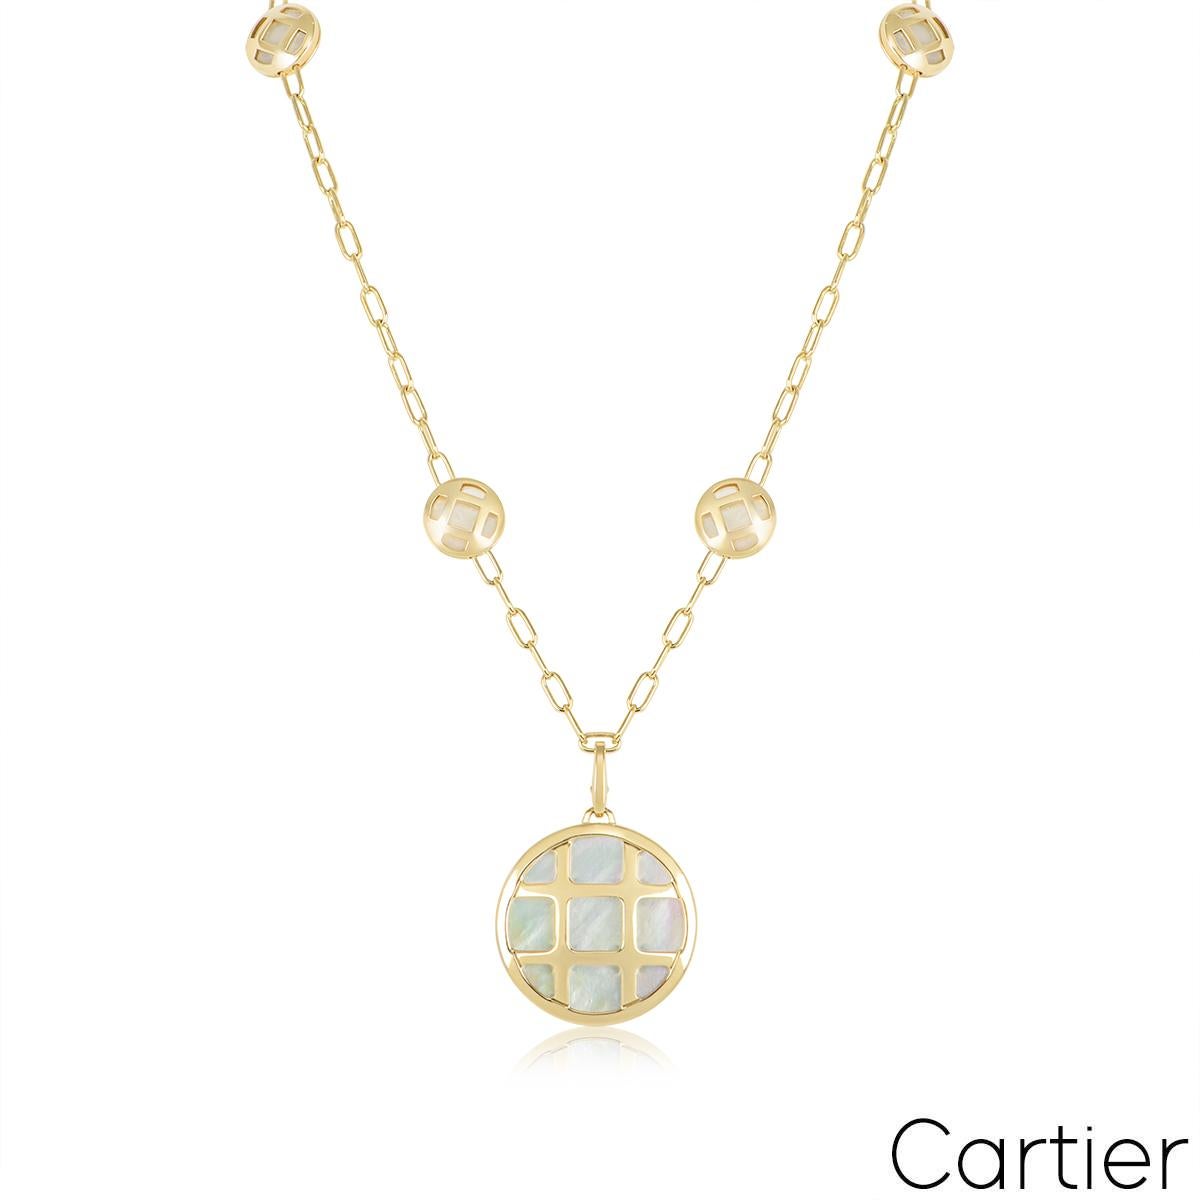 A beautiful 18k yellow gold jewellery suite by Cartier from the Pasha collection. The suite comprises of a detachable pendant, a necklace and a bracelet all featuring the iconic square grid design with a mother of pearl inlay set behind. The pendant